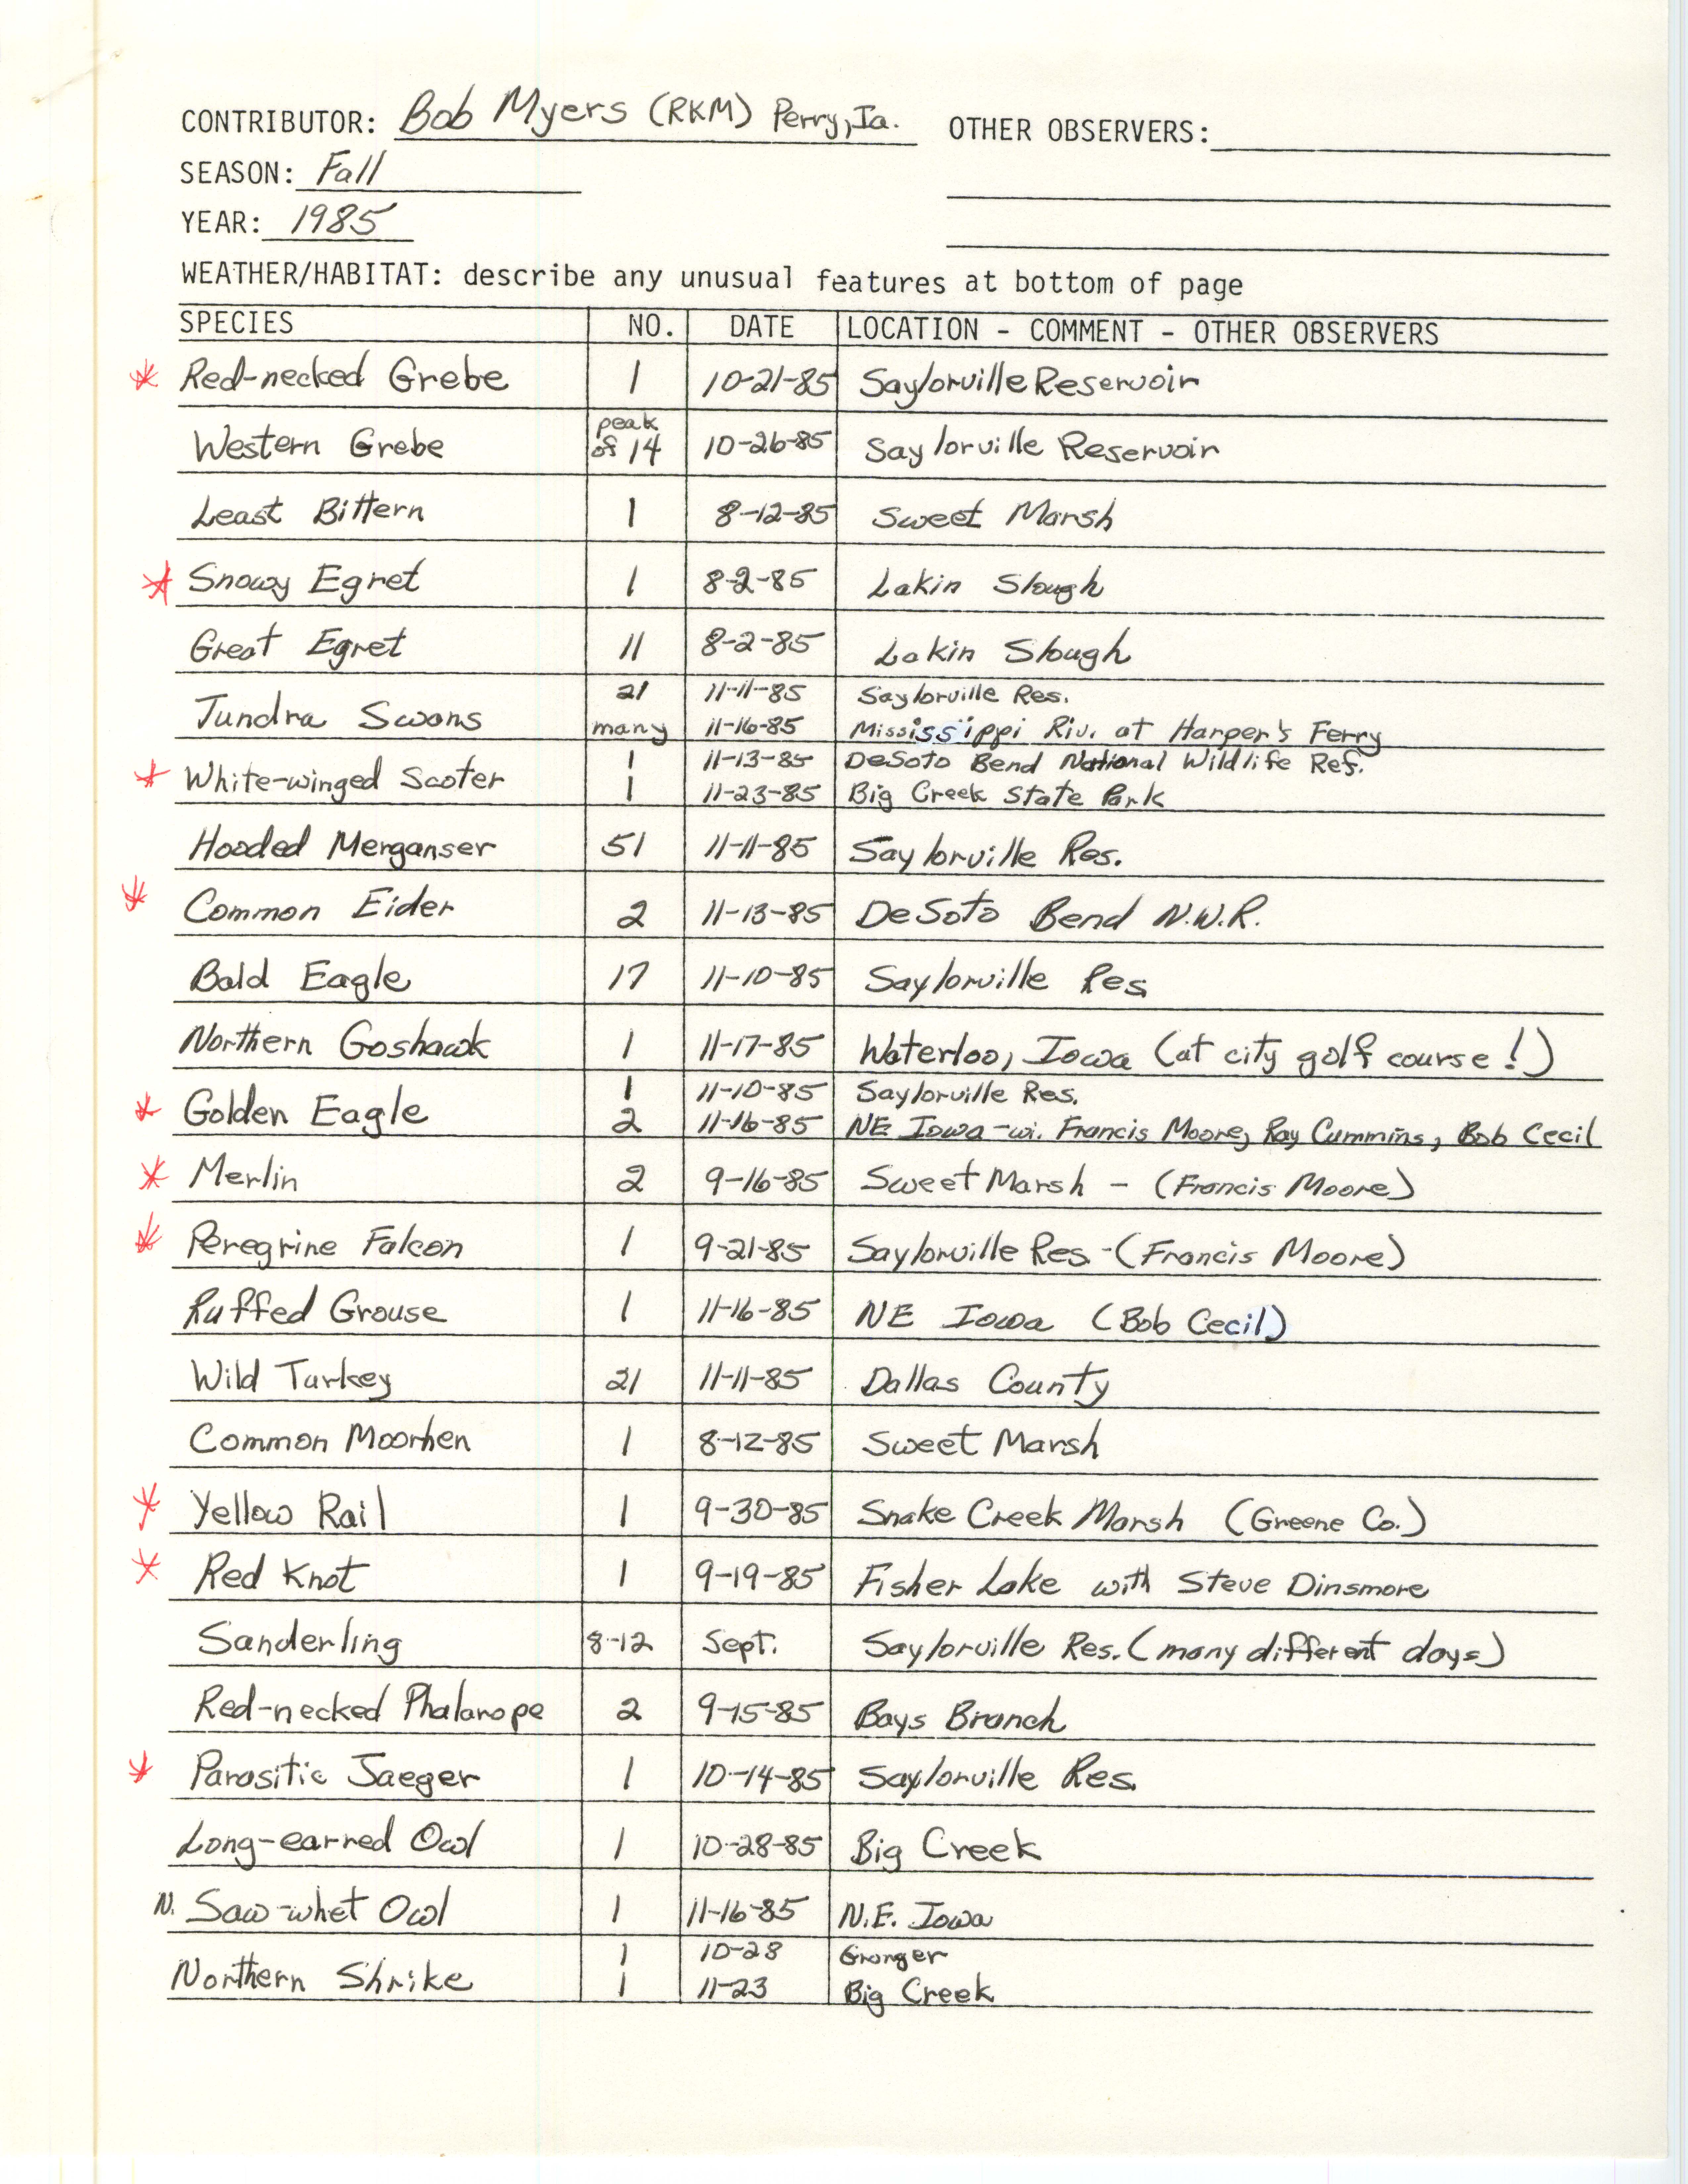 Annotated bird sighting list for Fall 1985 compiled by Bob Myers